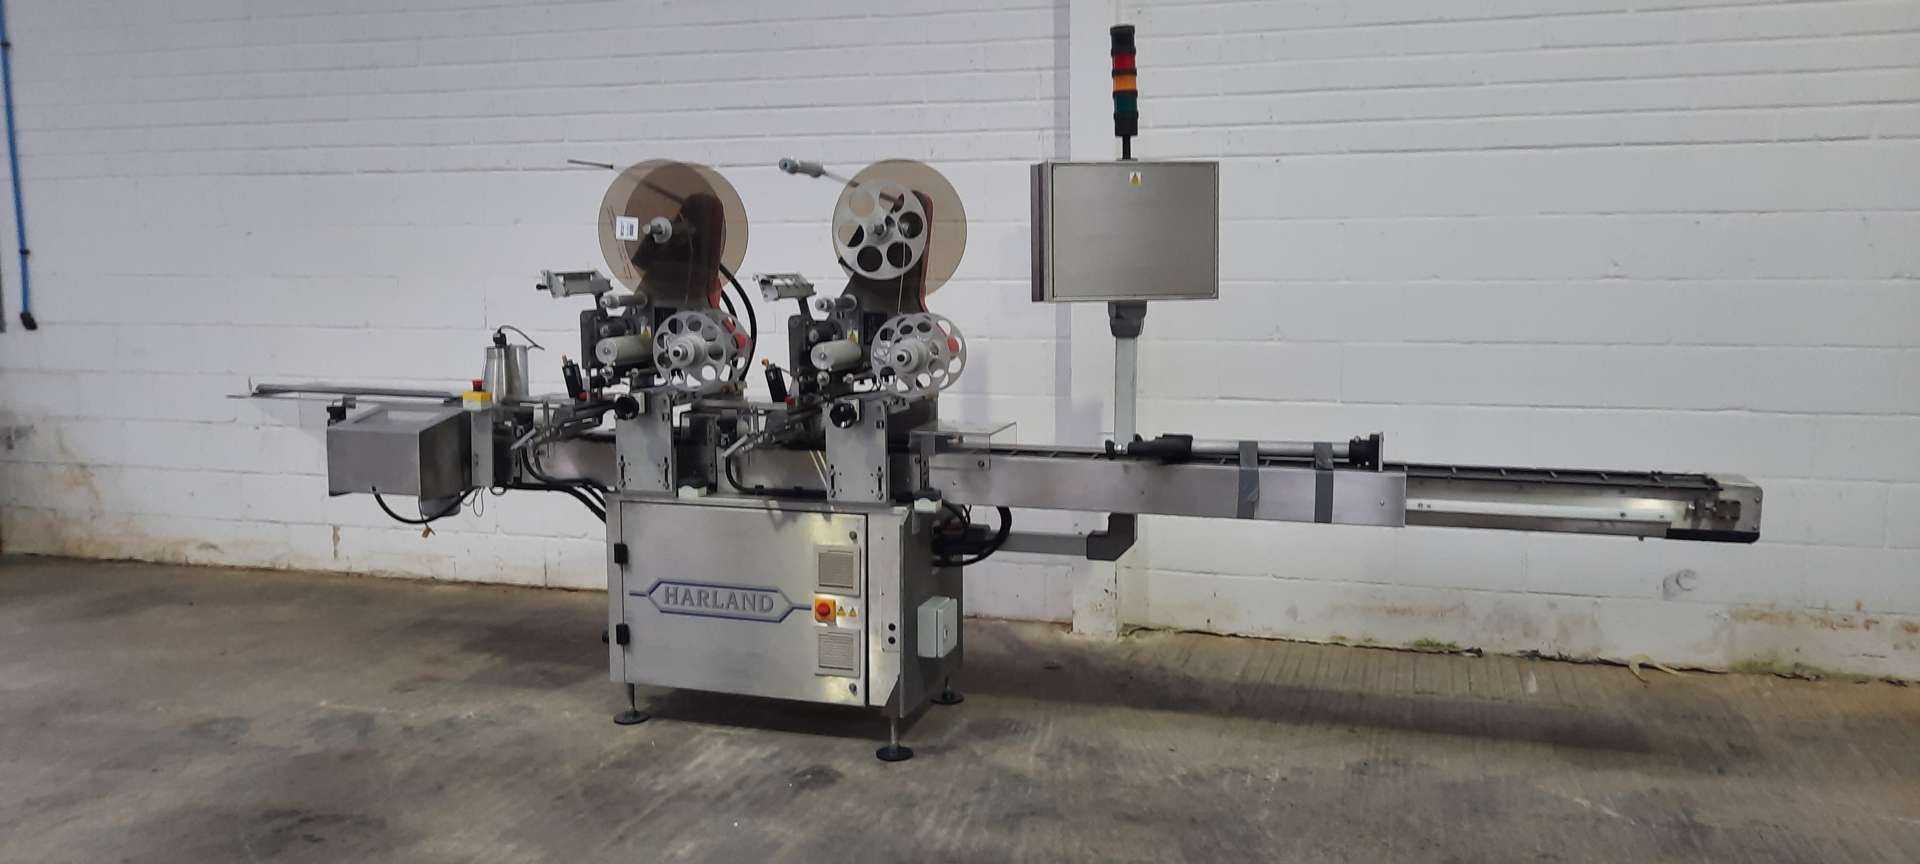 Harland Labeller MK 5 Sirius Automatic 2-Head Top Label Applicator with Comet Heads - Image 6 of 9